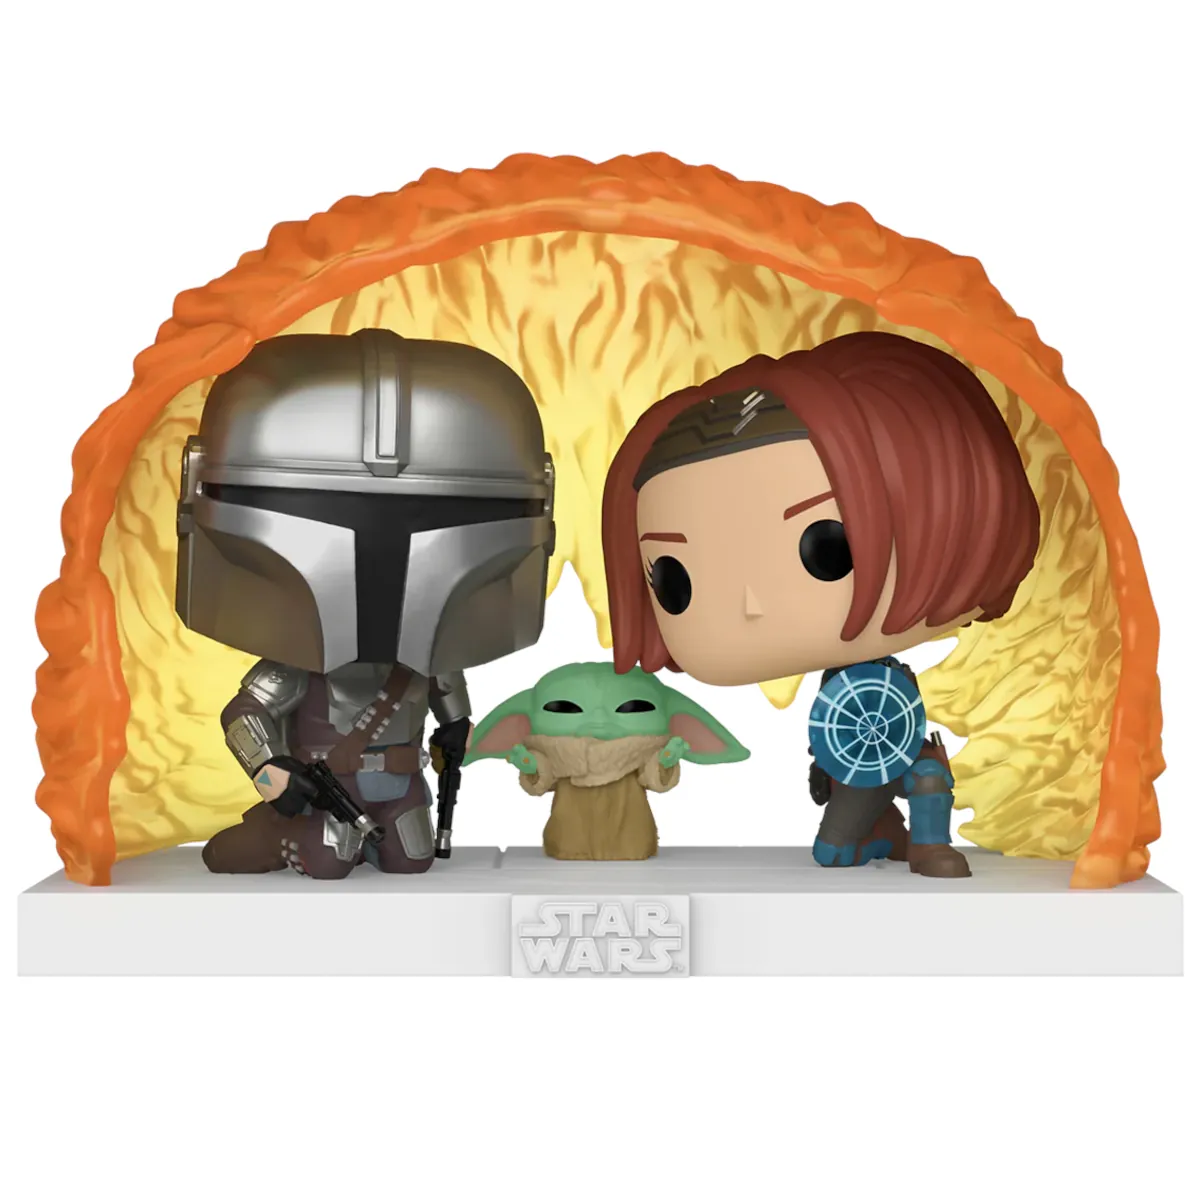 80002 Funko Pop! Television - Star Wars The Mandalorian - Grogu Force Barrier Collectable Vinyl Figure